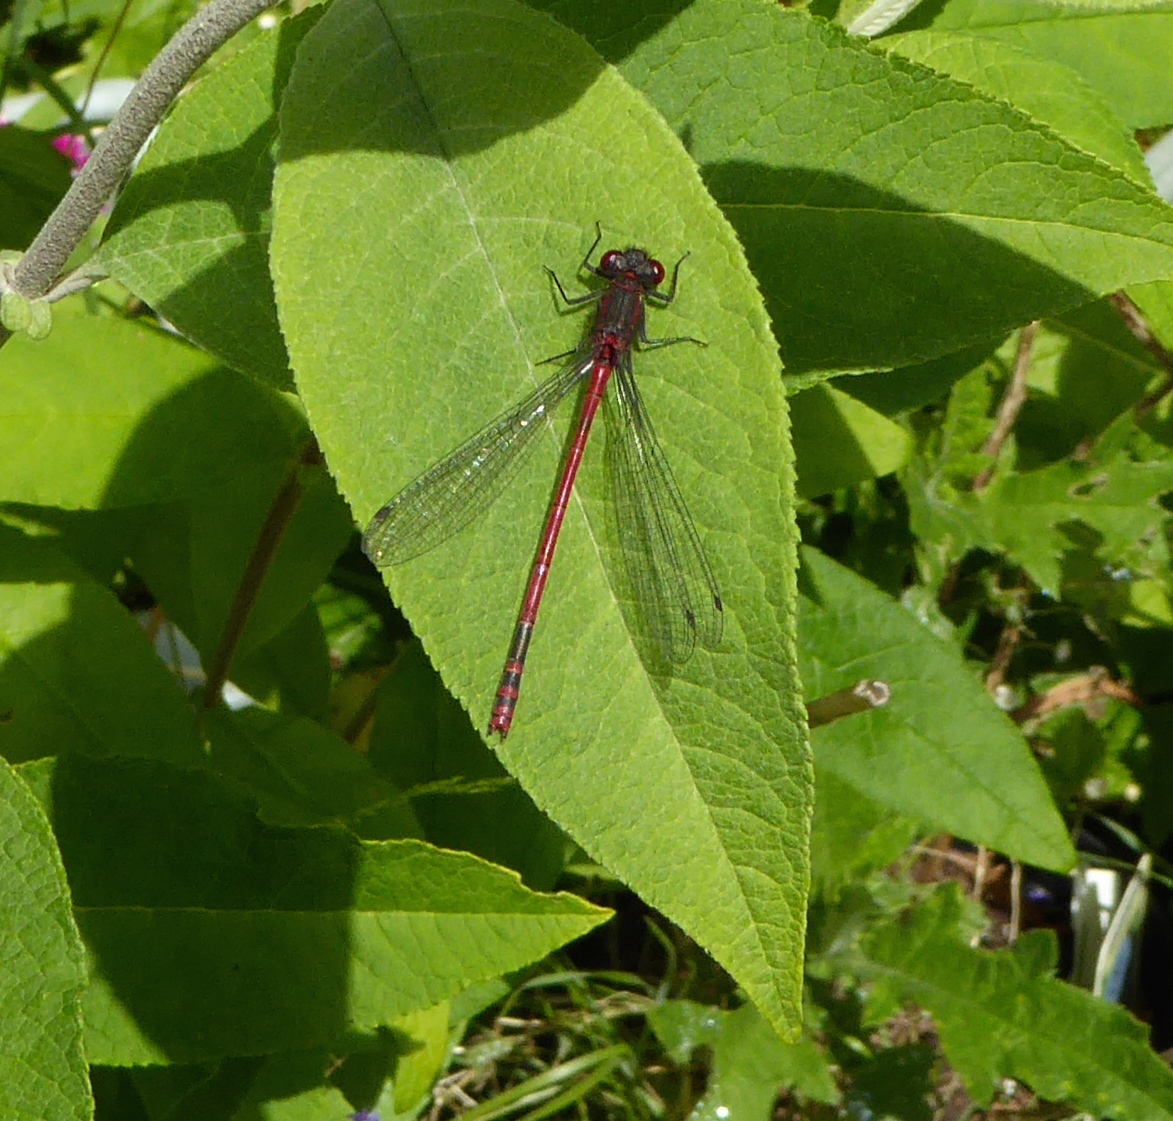 the dragonfly rests on the green leaf in the sun